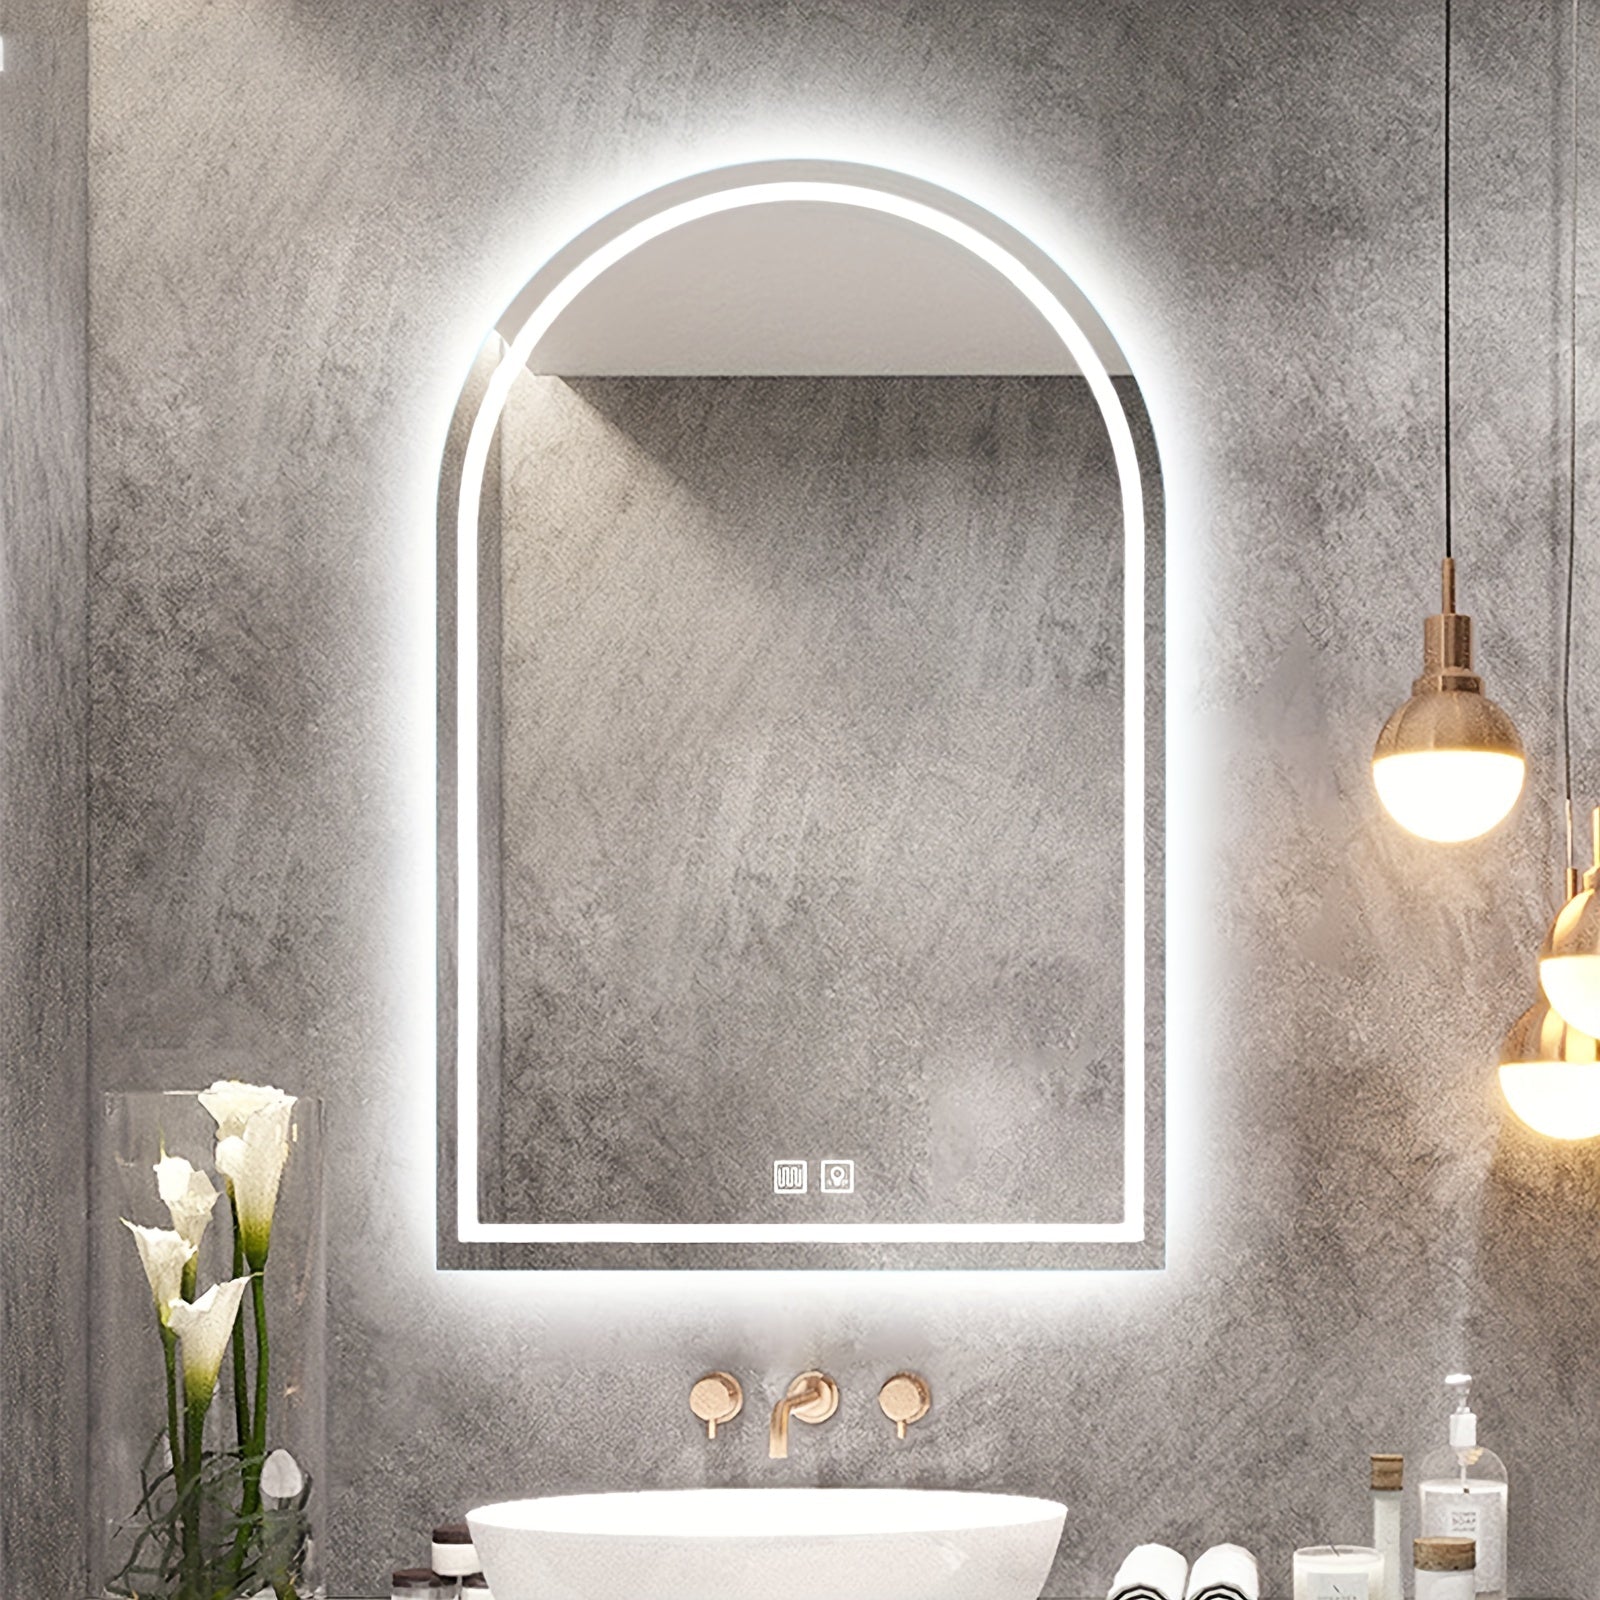 1pc French Arched LED Wall Mounted Mirror, Full Body Mirror, Bathroom Mirror With Memory Function, Adjustable Brightness, IP54 Enhanced Defogging Function, Home Decoration, American Standard Plug